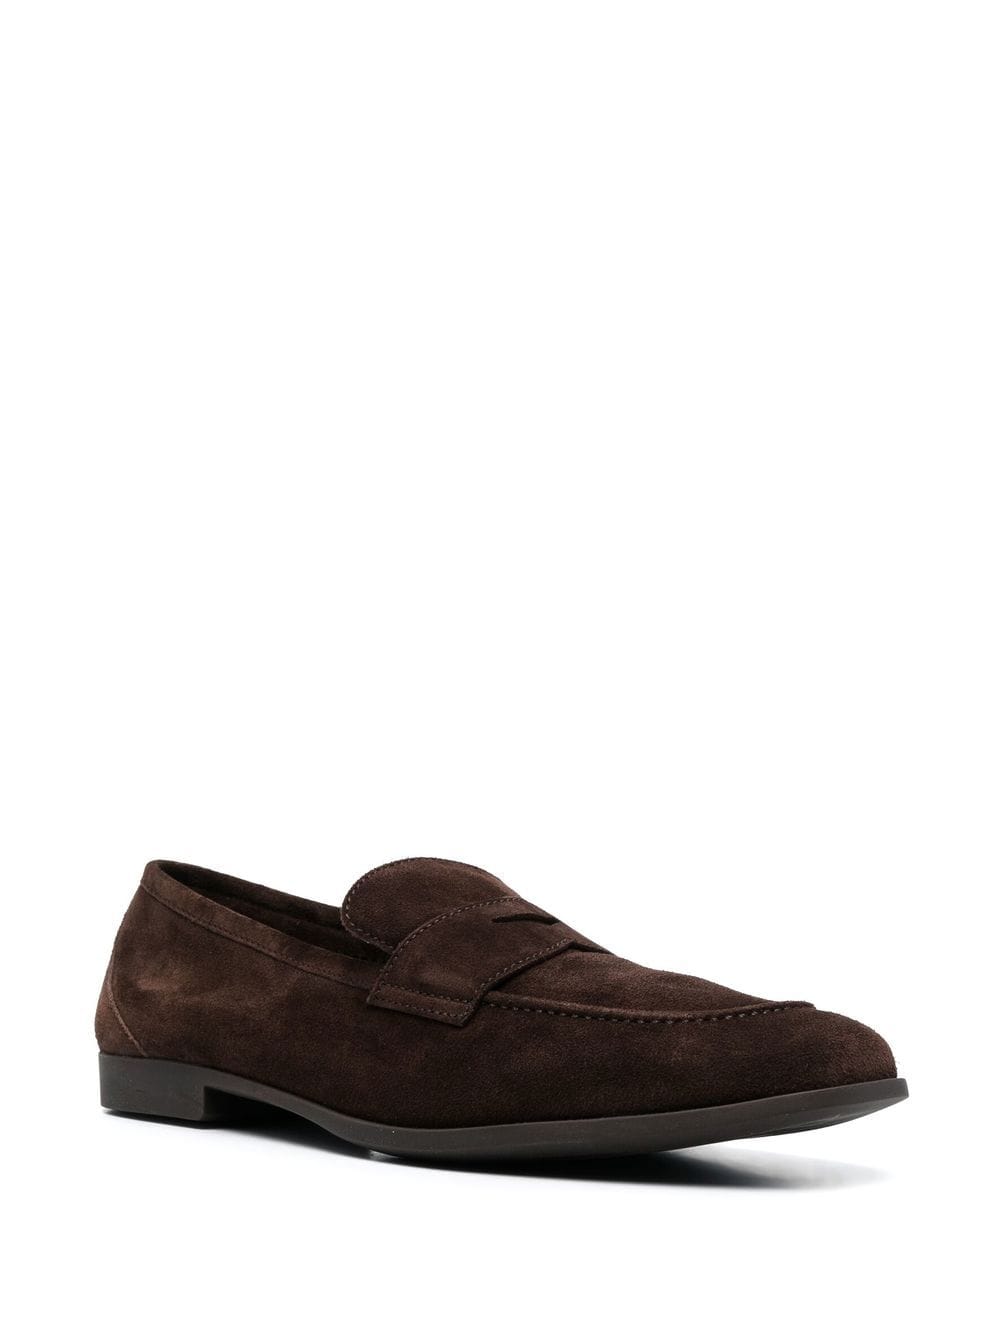 Image 2 of Fratelli Rossetti slip-on suede penny loafers